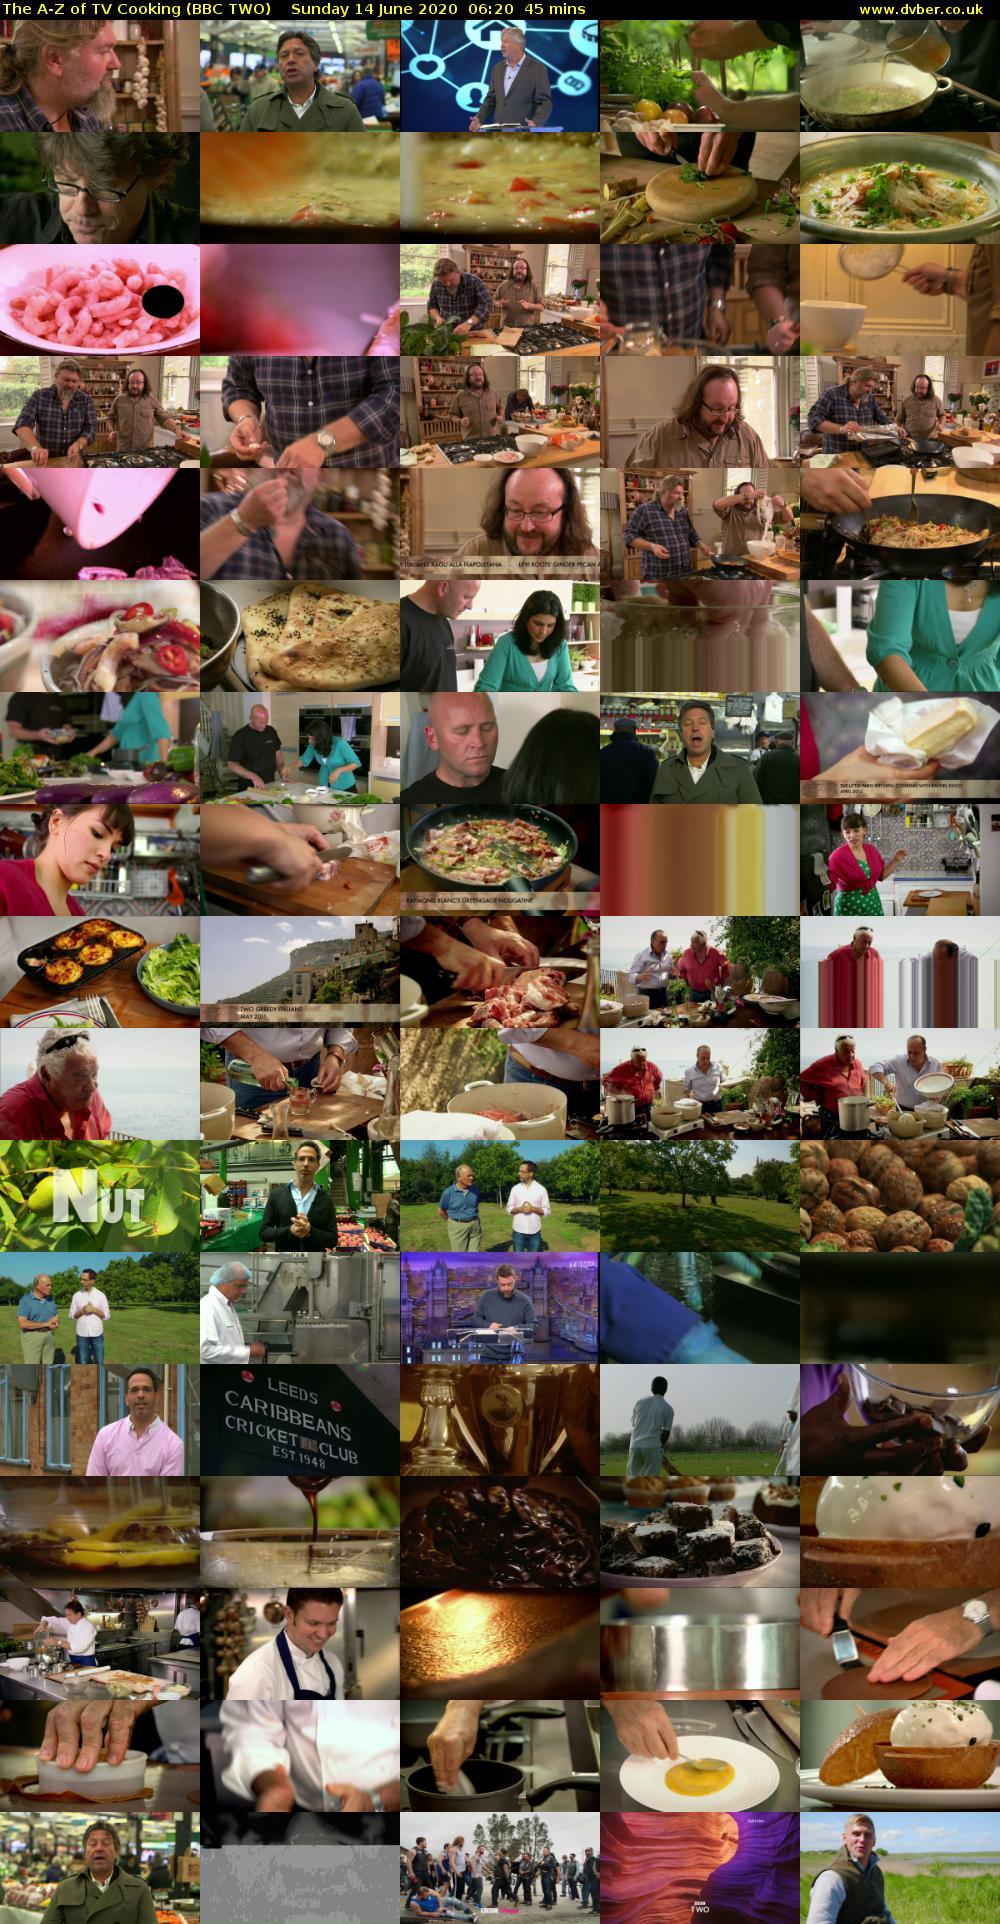 The A-Z of TV Cooking (BBC TWO) Sunday 14 June 2020 06:20 - 07:05